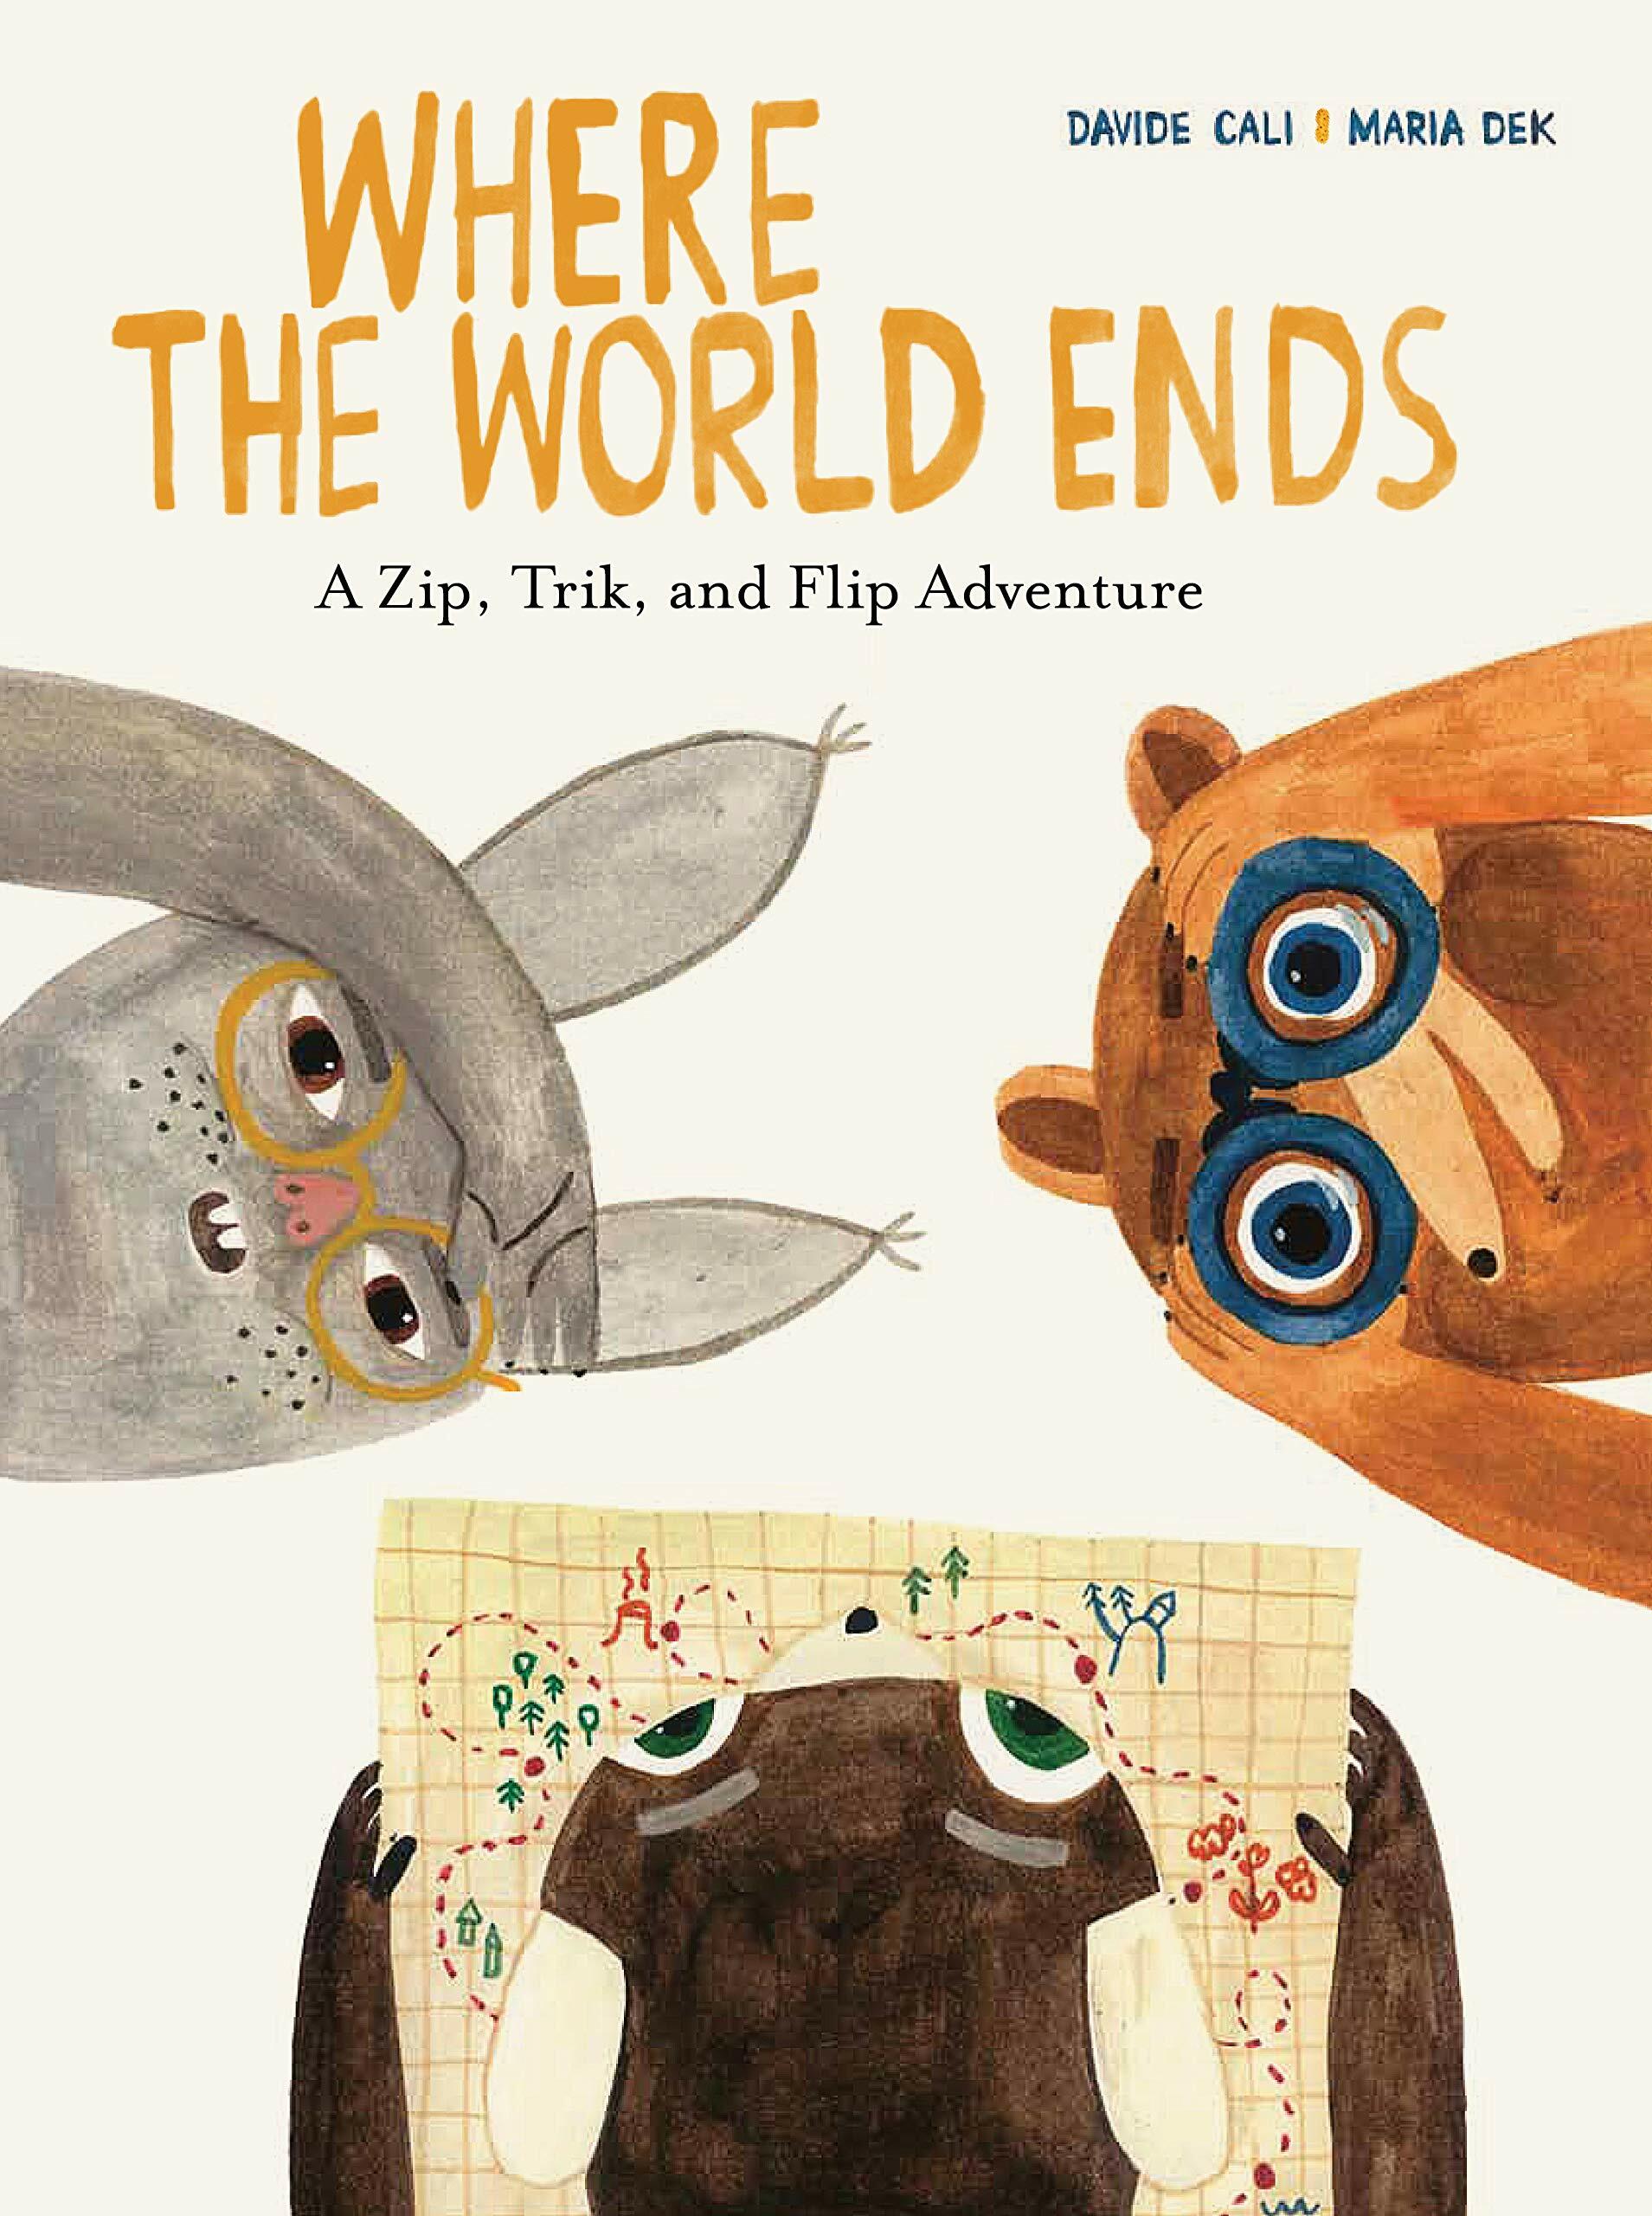 Where the World Ends: A Zip, Trik, and Flip Adventure (Hardcover)